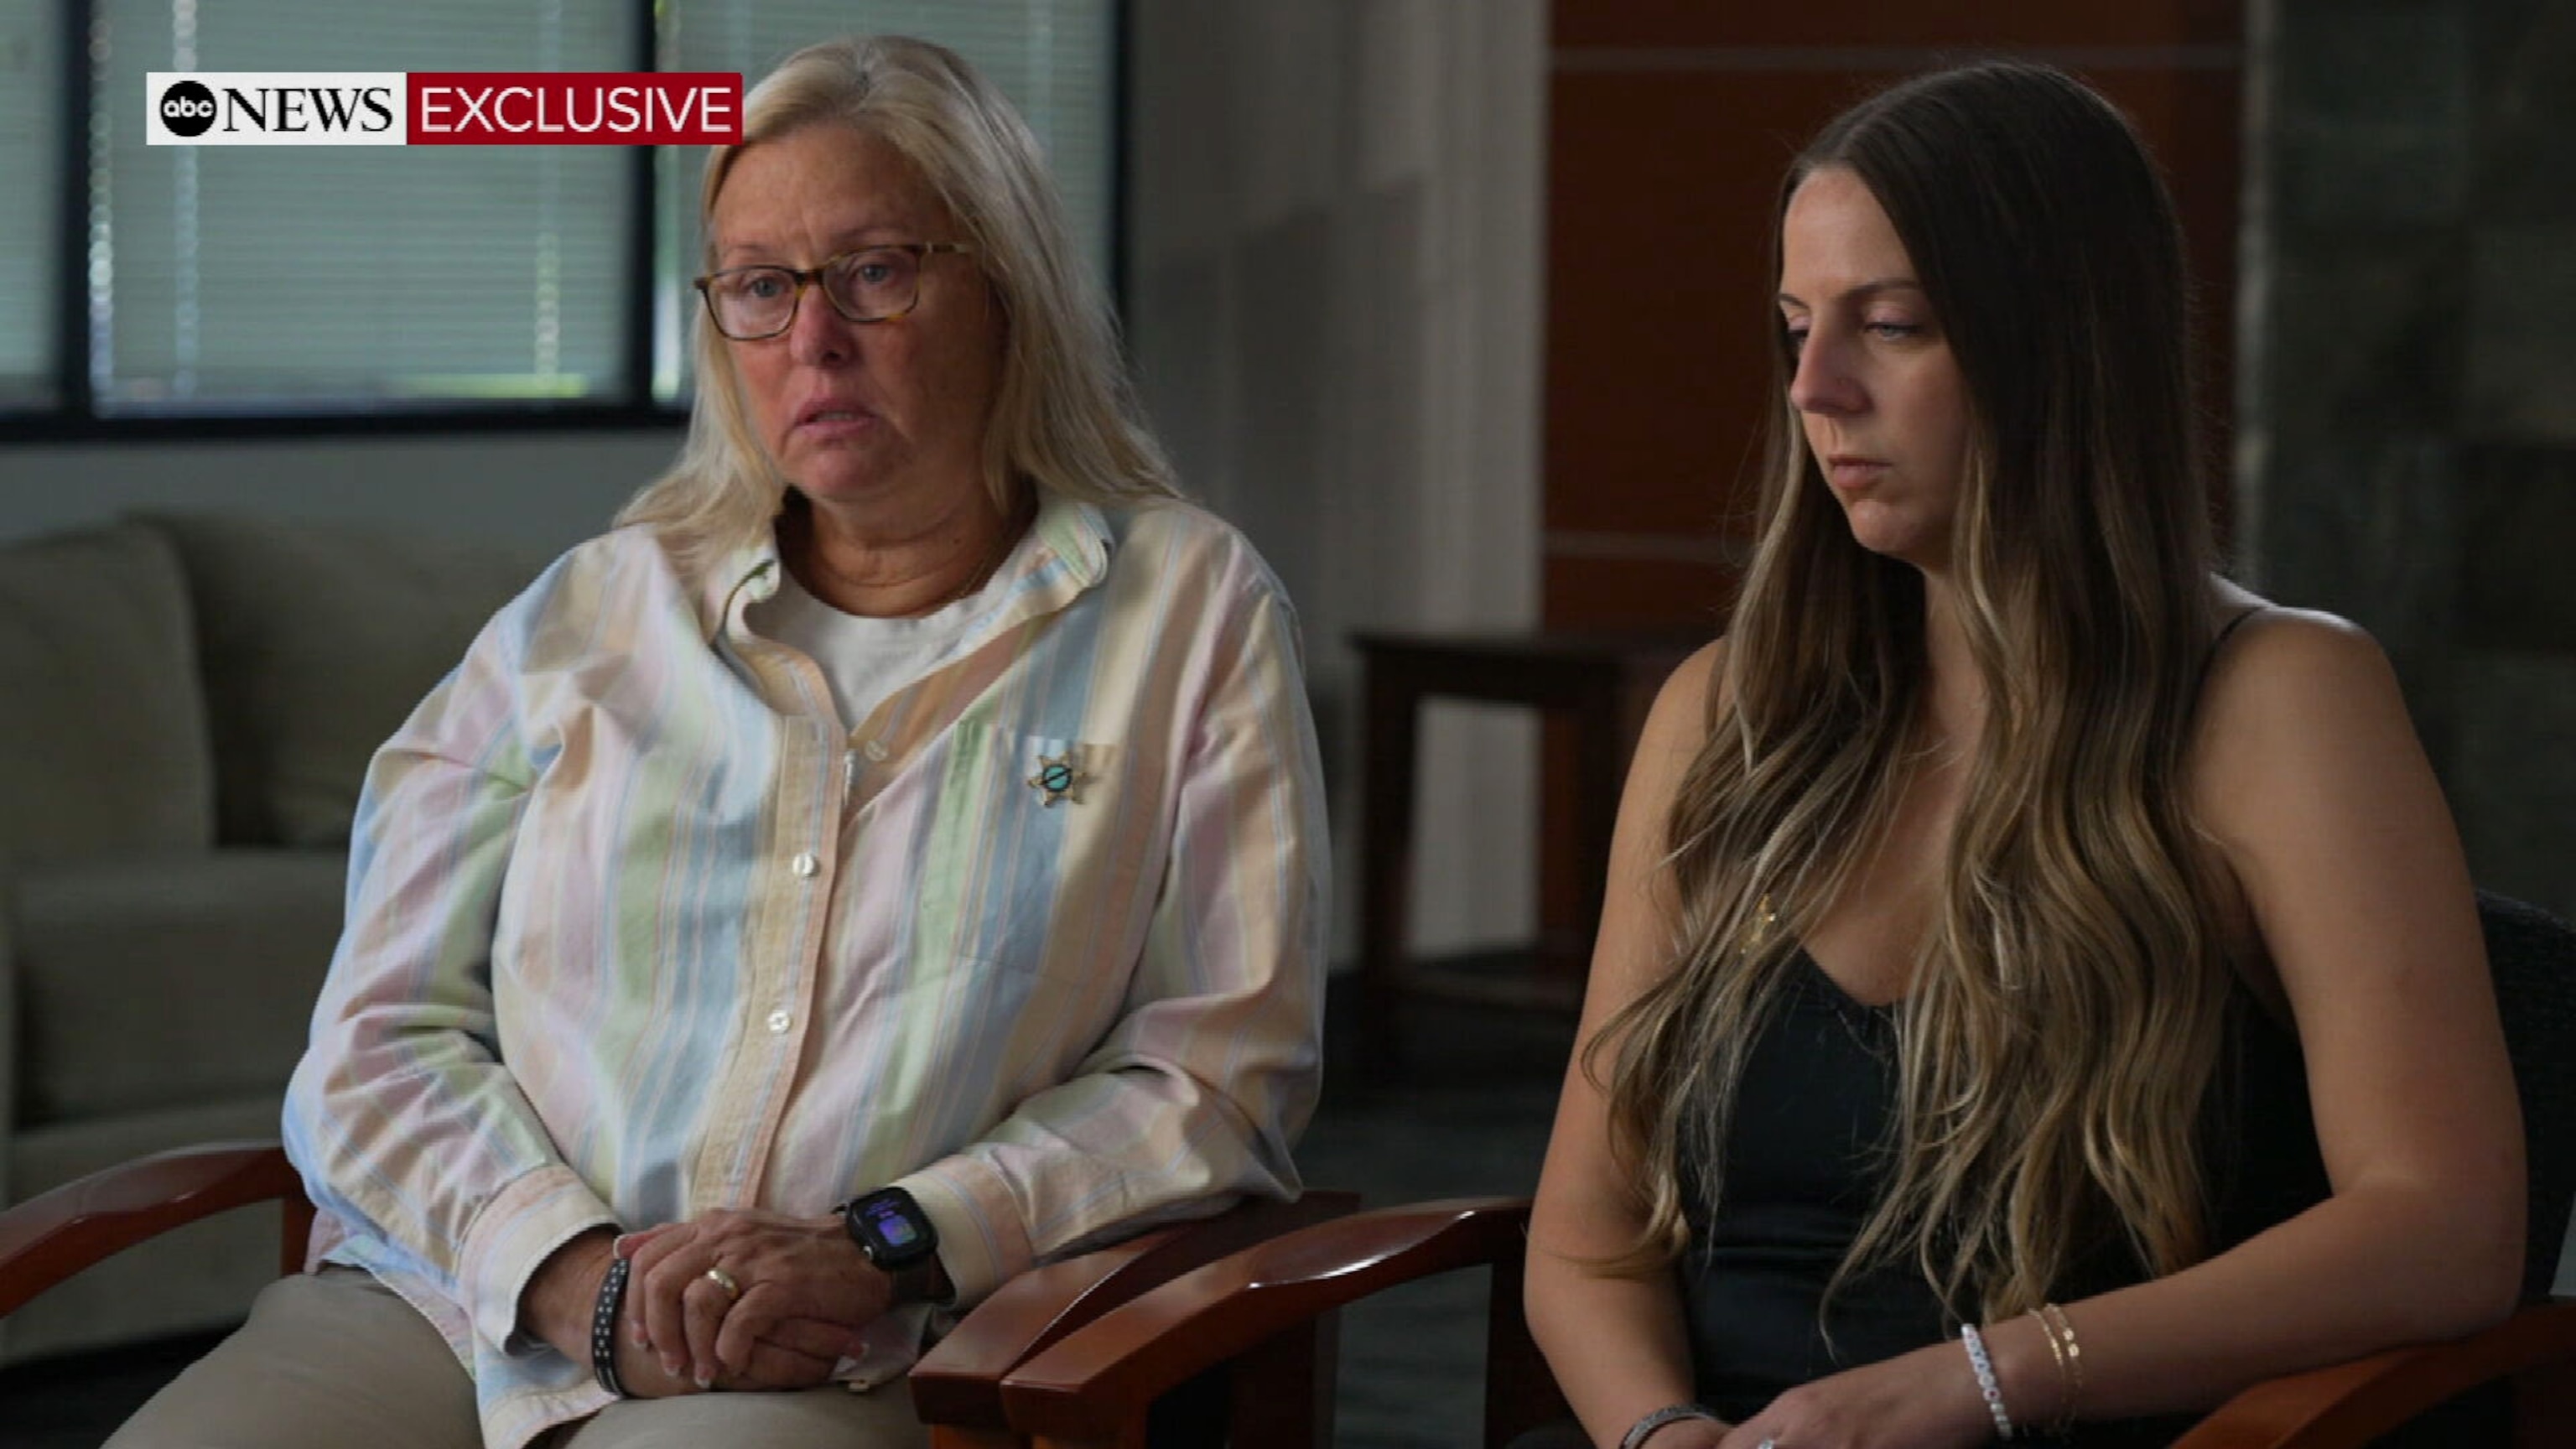 PHOTO: Kim Clinkunbroomer, the mother of slain Los Angeles County sheriff's deputy Ryan Clinkunbroomer and Brittany Lindsey, the fiancee of slain Los Angeles County sheriff's deputy Ryan Clinkunbroomer, speaks to ABC News in an exclusive interview.